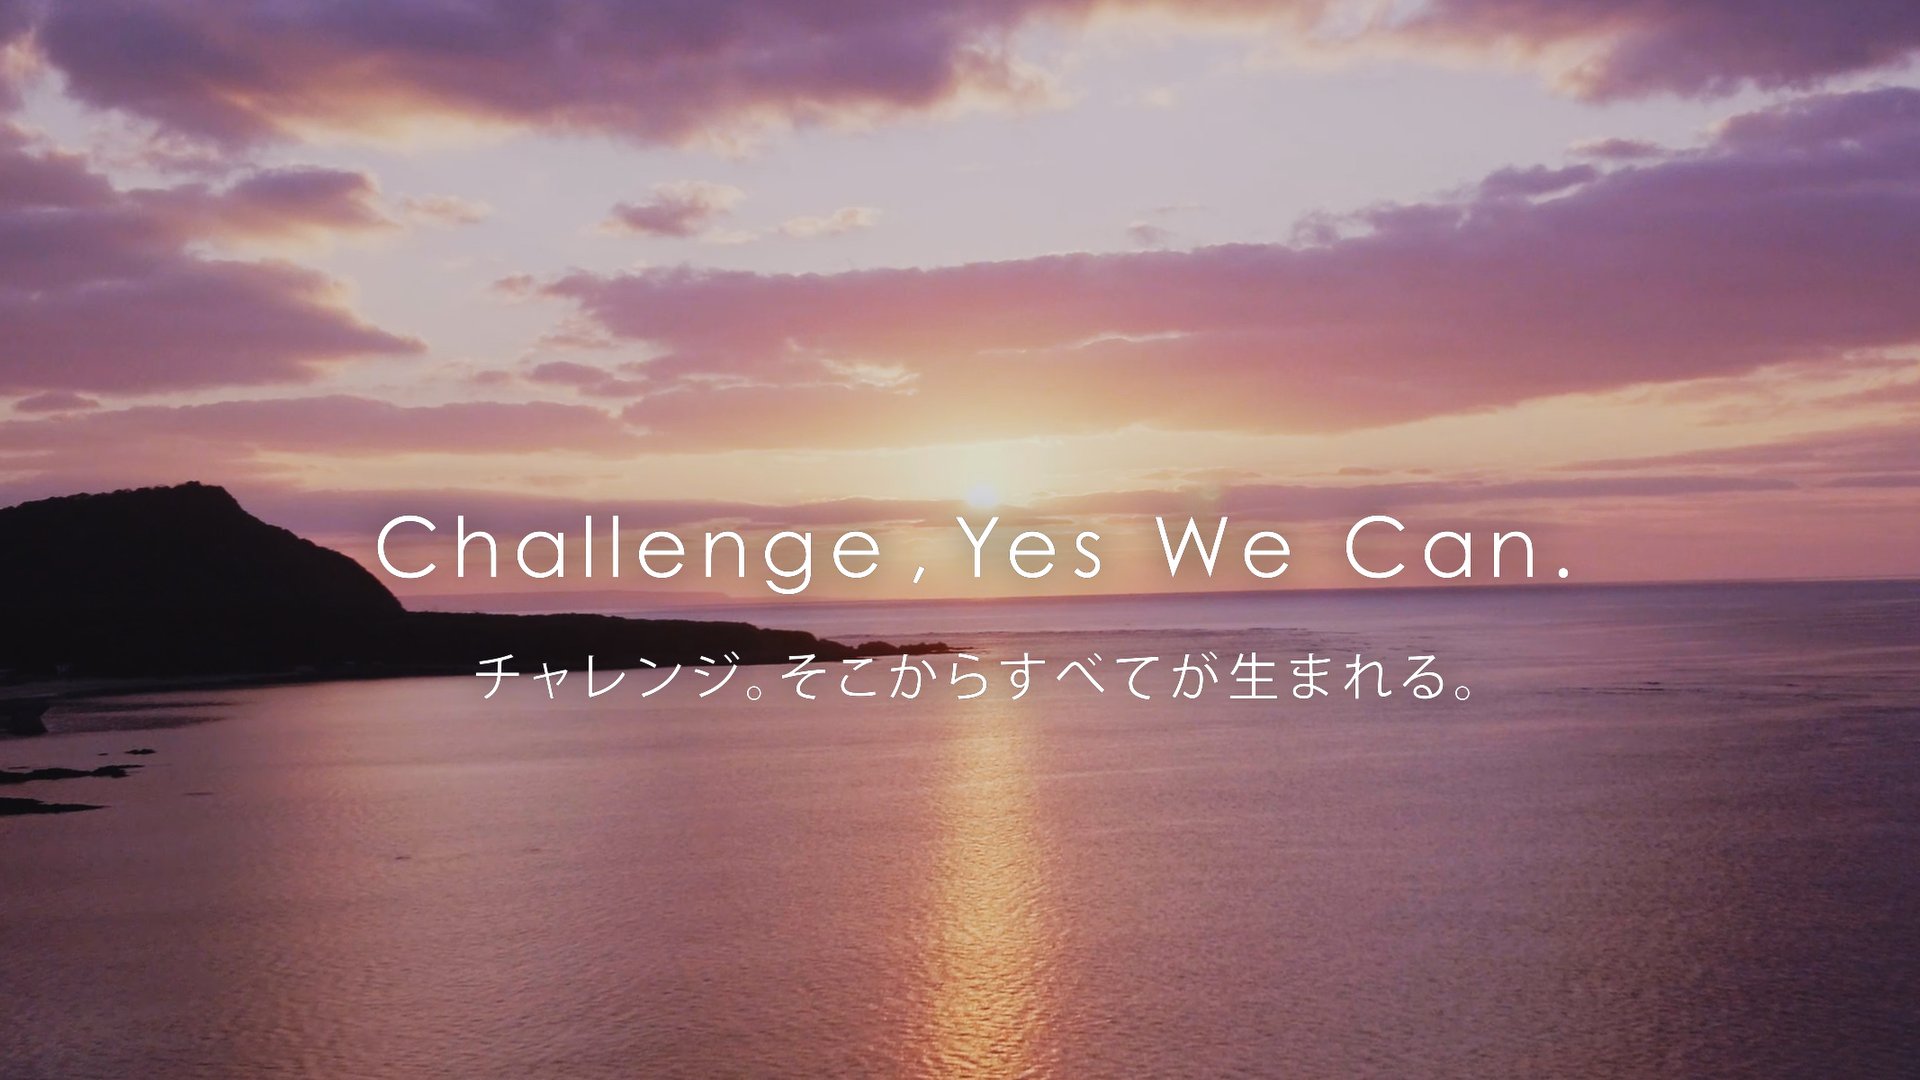 Challenge, Yes We can.